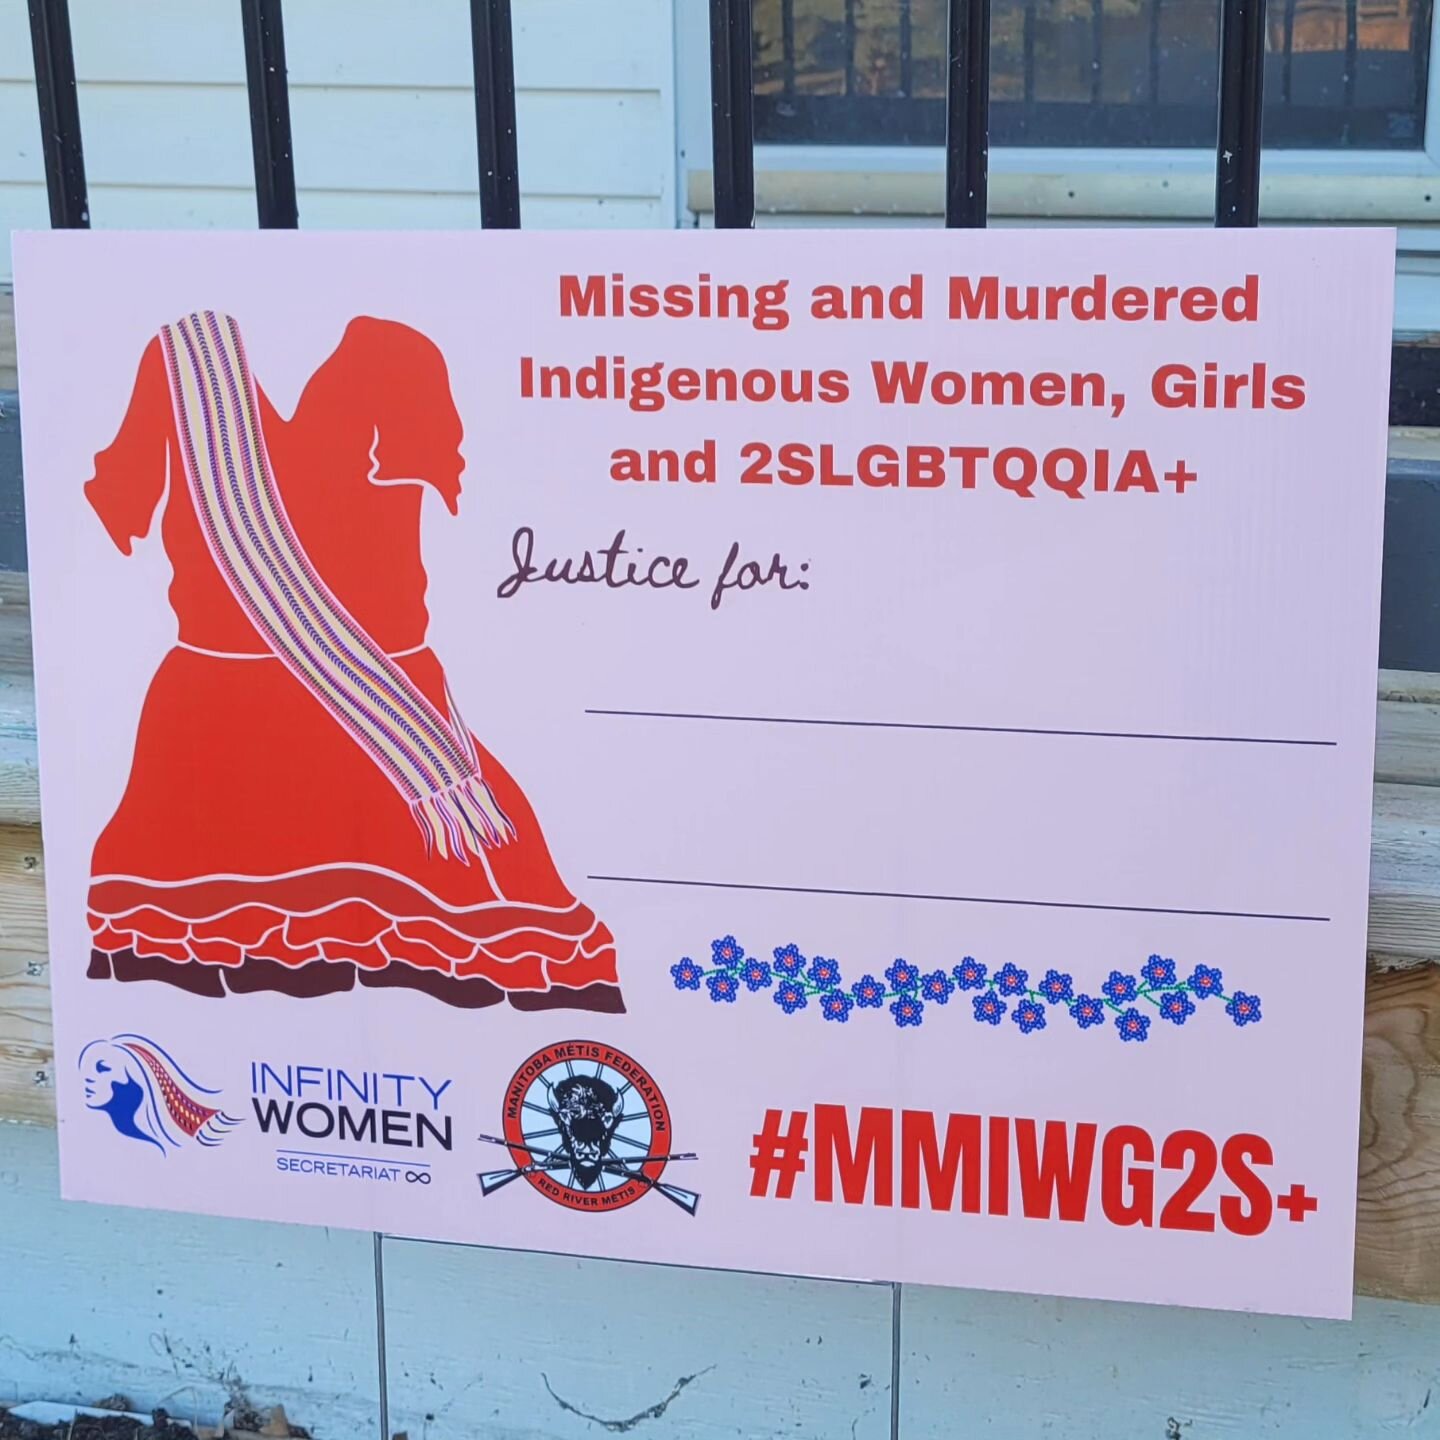 Thank you to @infinitywomensecretariat for this sign!! #mmiwg2s 
Spread awarness